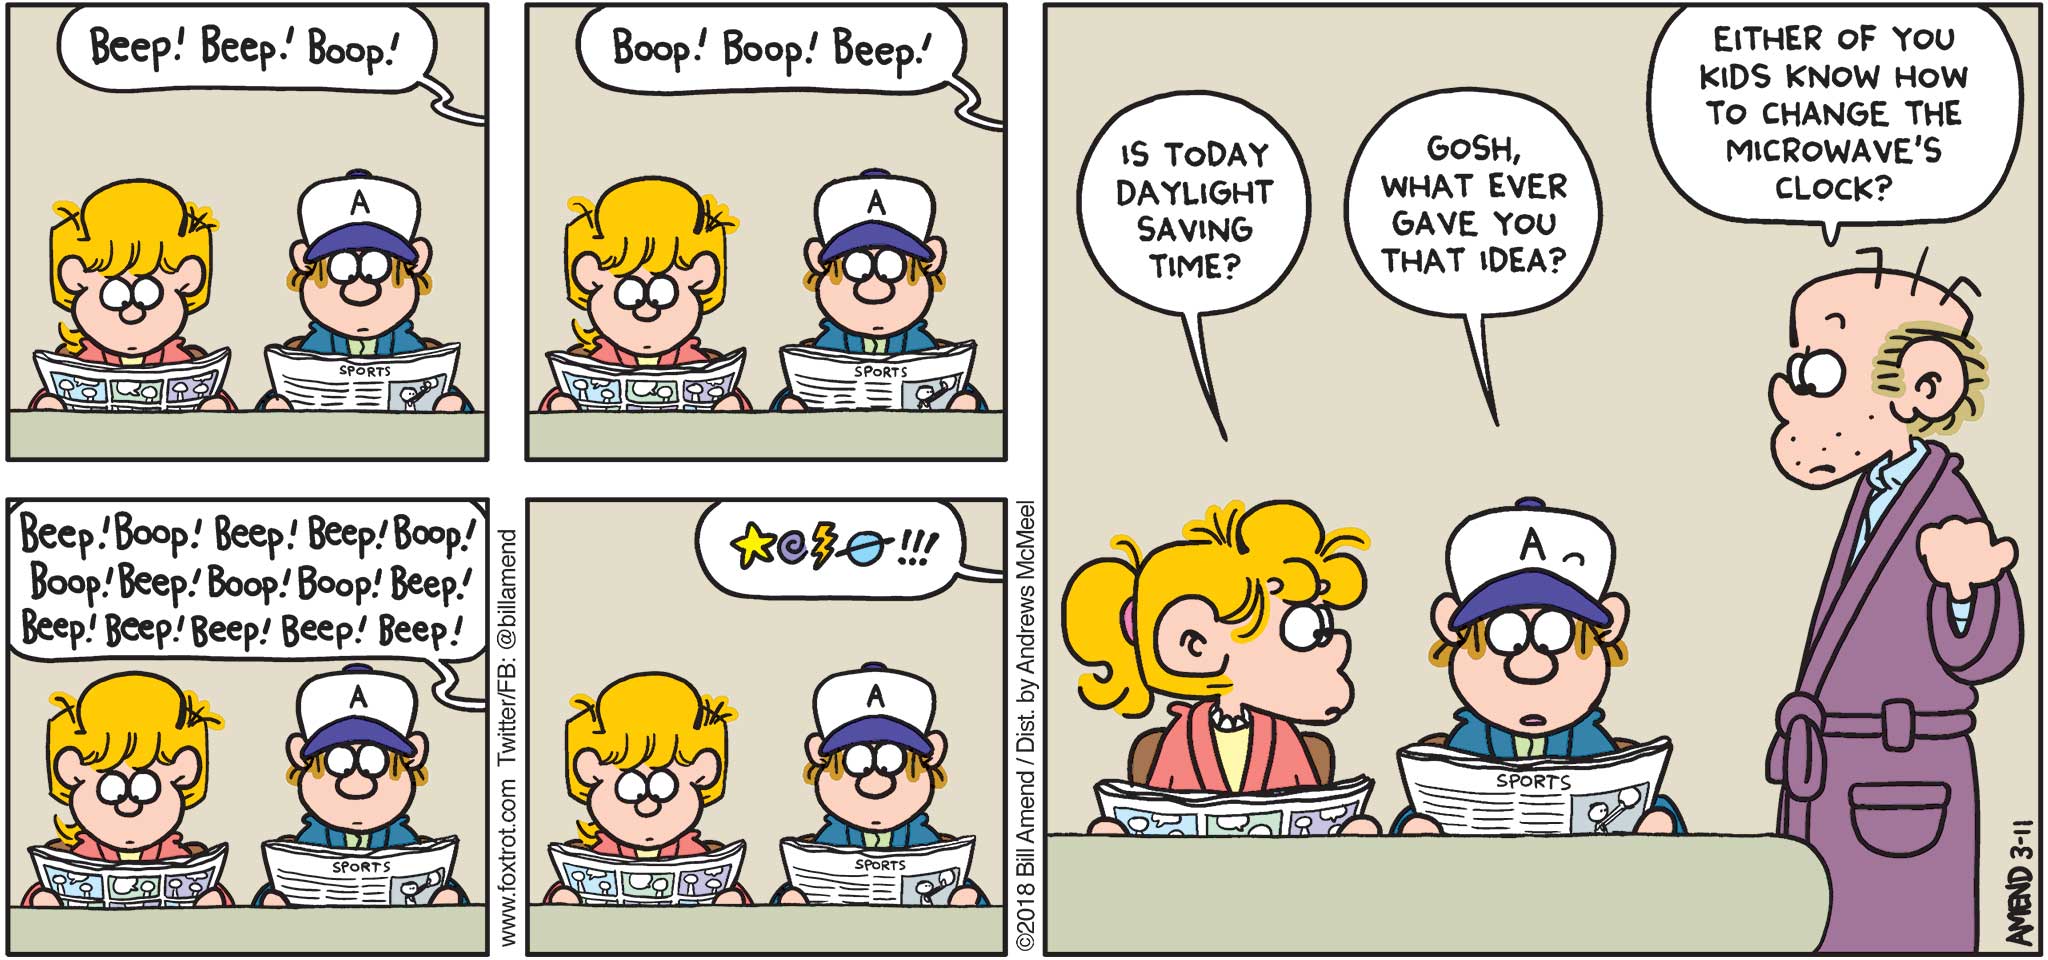 FoxTrot by Bill Amend - "Beeps and Bleeps" published March 11, 2018 - Beep! Beep! Boop! Boop! Boop! Beep! Beep! Boop! Beep! Boop! Boop! Beep! Boop! Boop! Beep! Beep! Beep! Beep! Beep! Beep! Censored word!!! Paid says: Is today daylight saving time? Peter says: Gosh, what ever gave you that idea? Roger says: Either of you kids now how to change the microwave's clock?